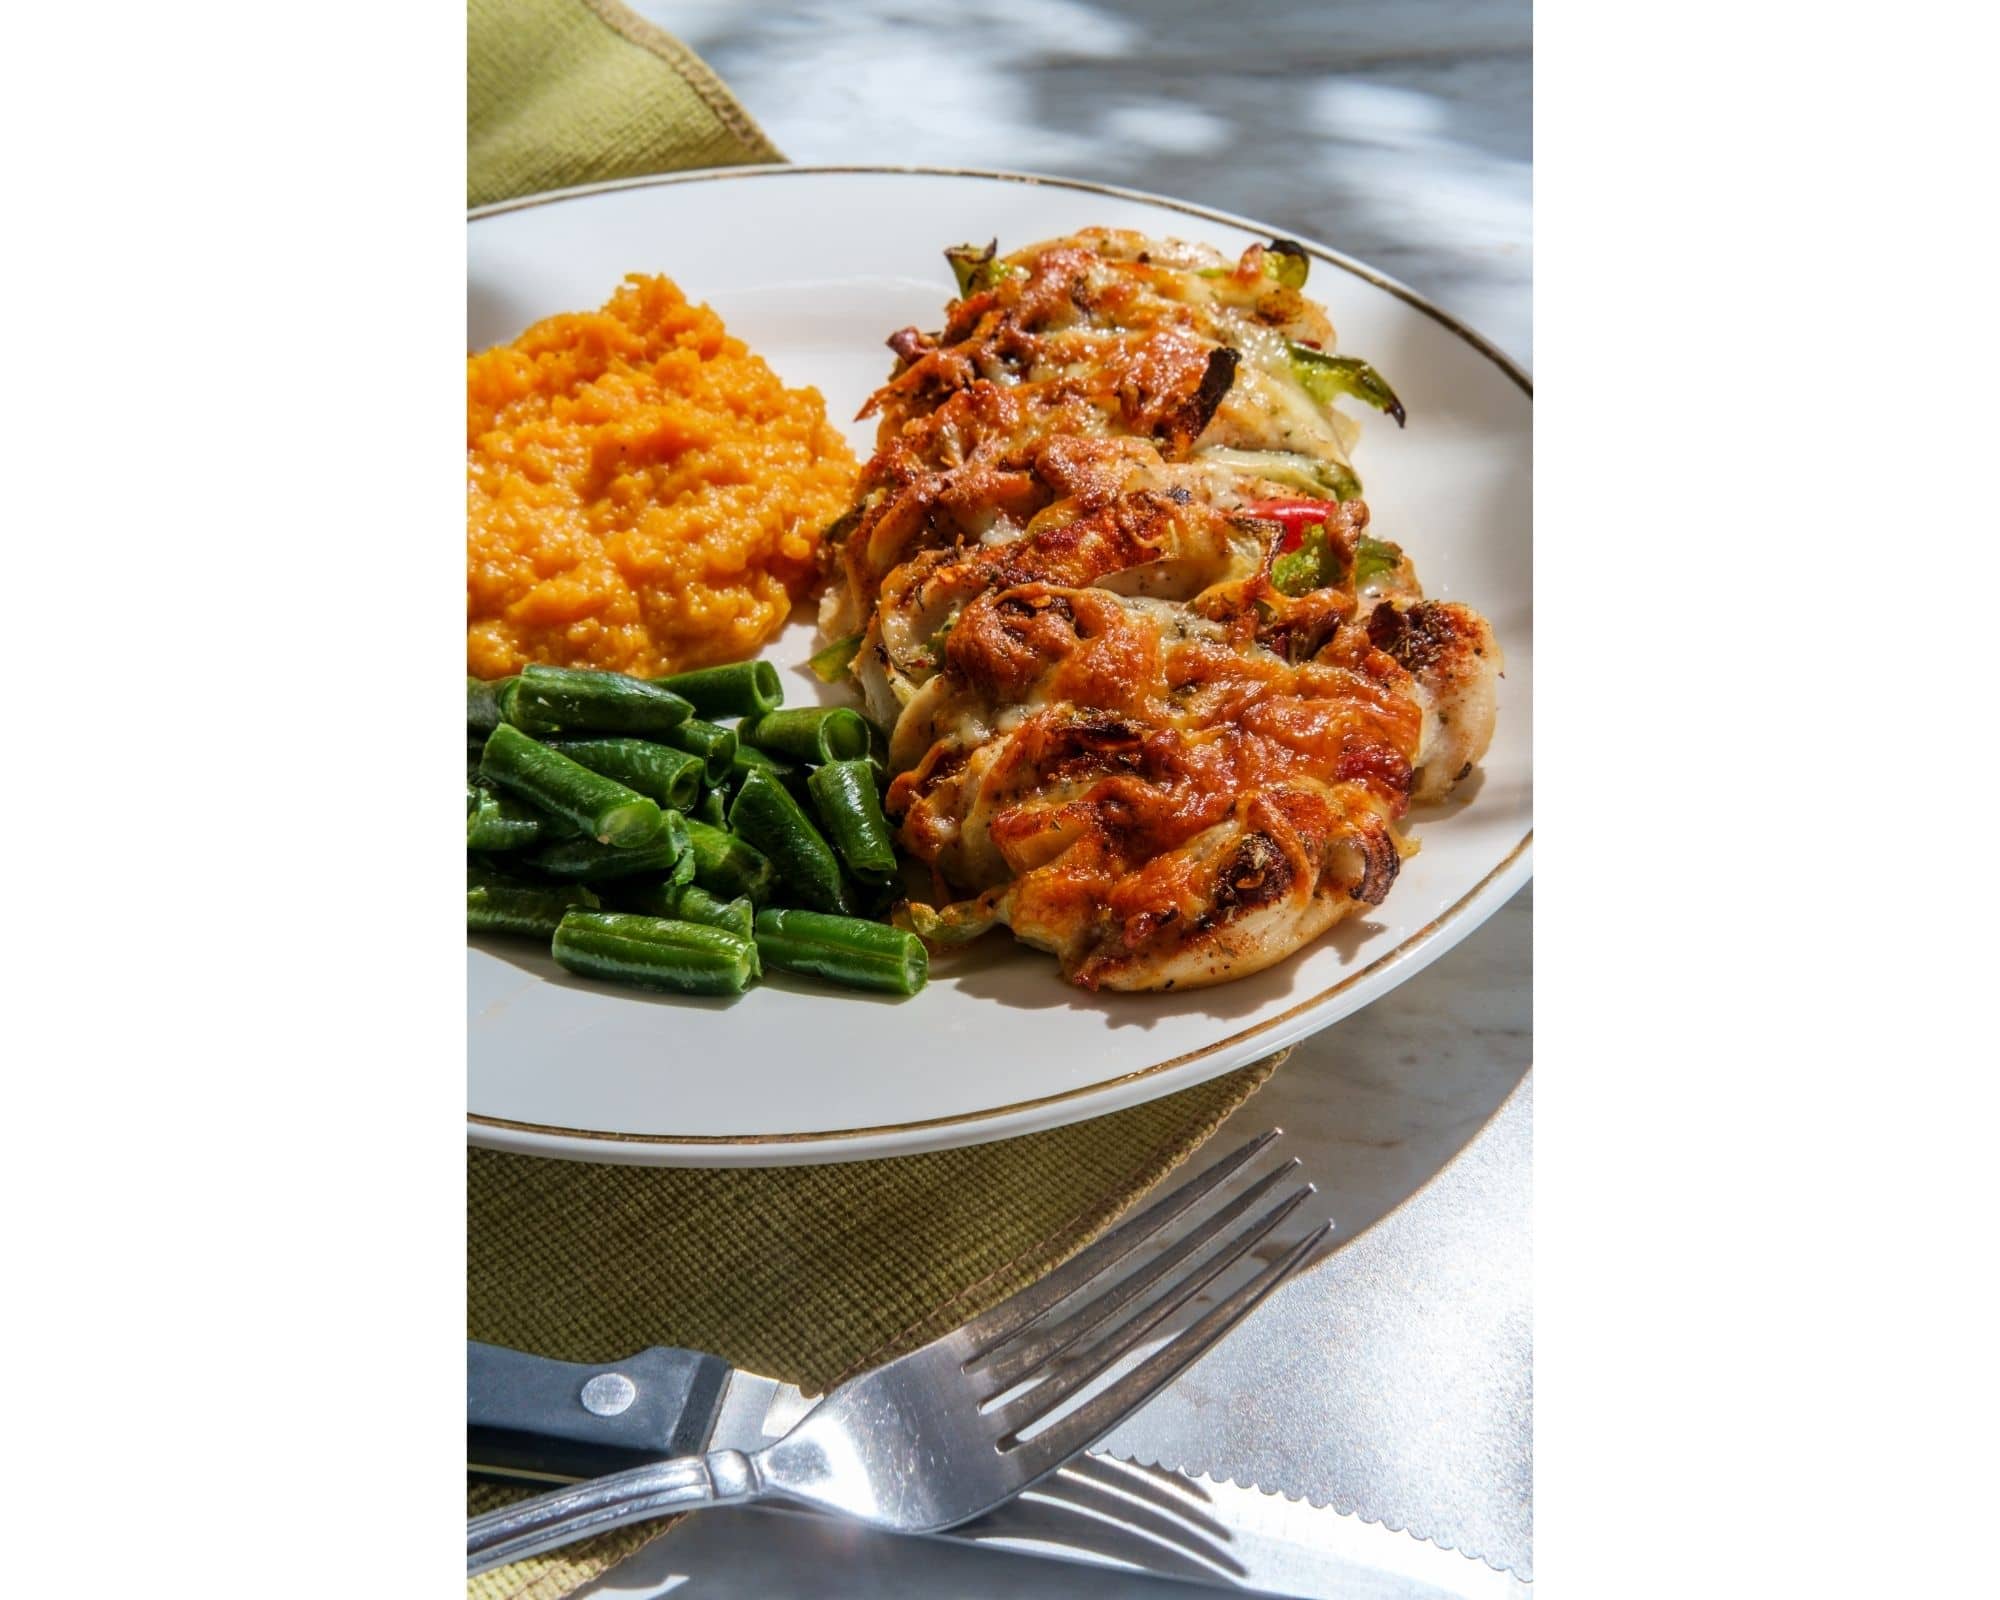 hasselback chicken with green beans and sweet potatoes